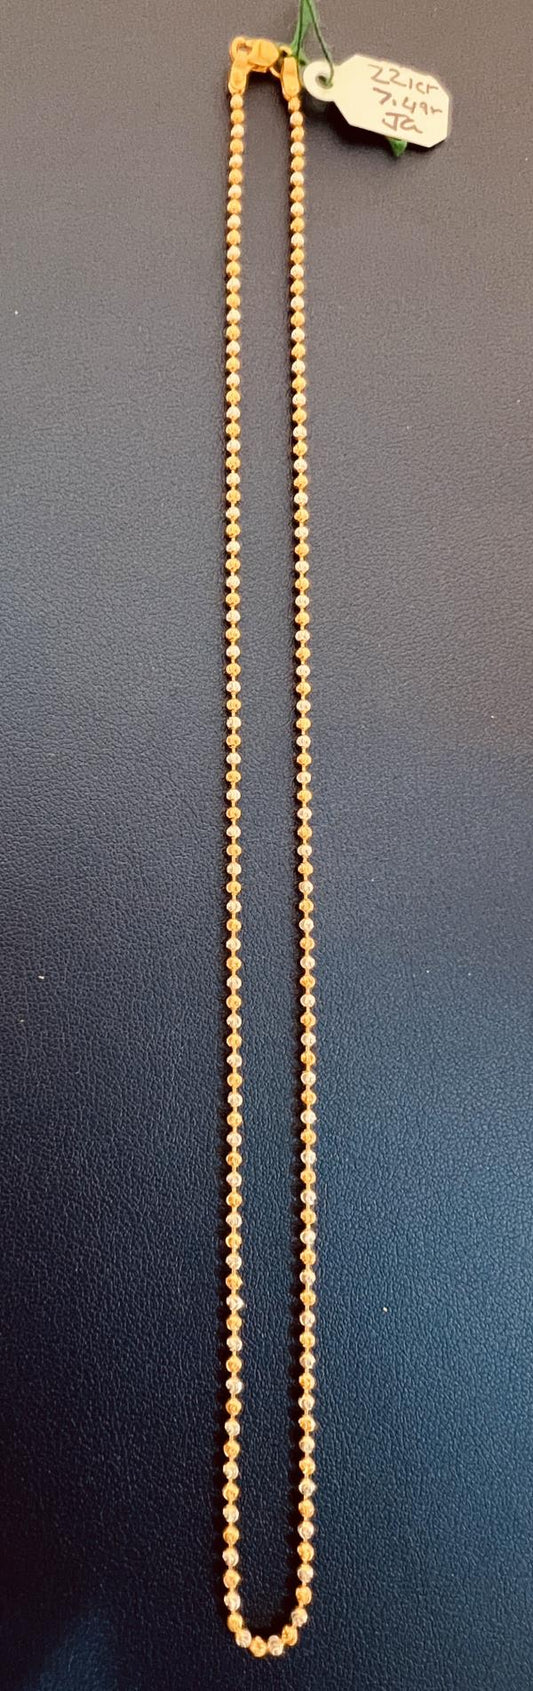 22KT GOLD CHAIN 17" TWO TONE 7.4GM